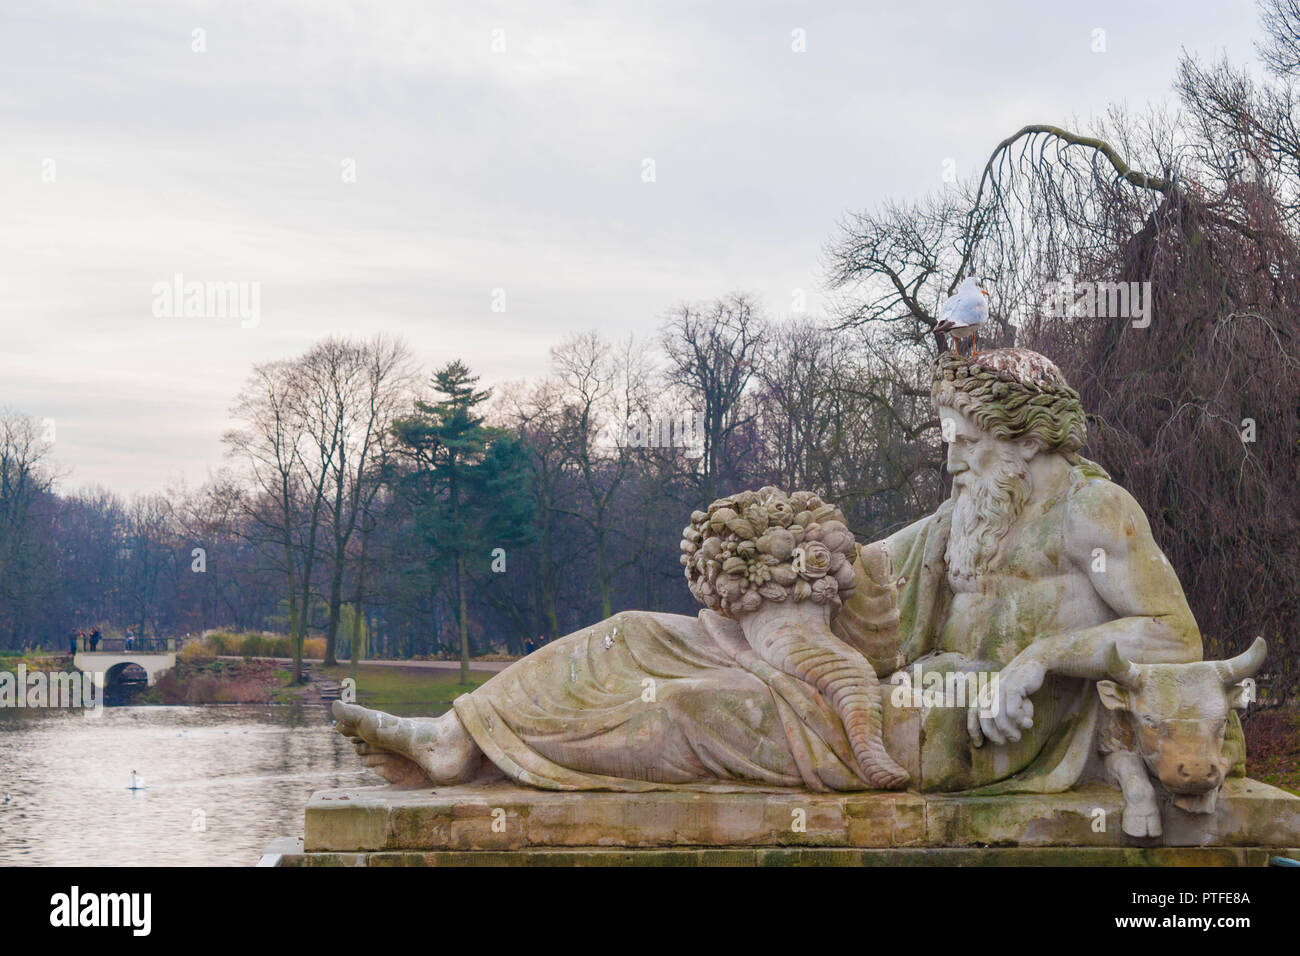 Allegory of the Bug river, statue in Lazienki Park (Royal Baths Park), Warsaw, Poland Stock Photo